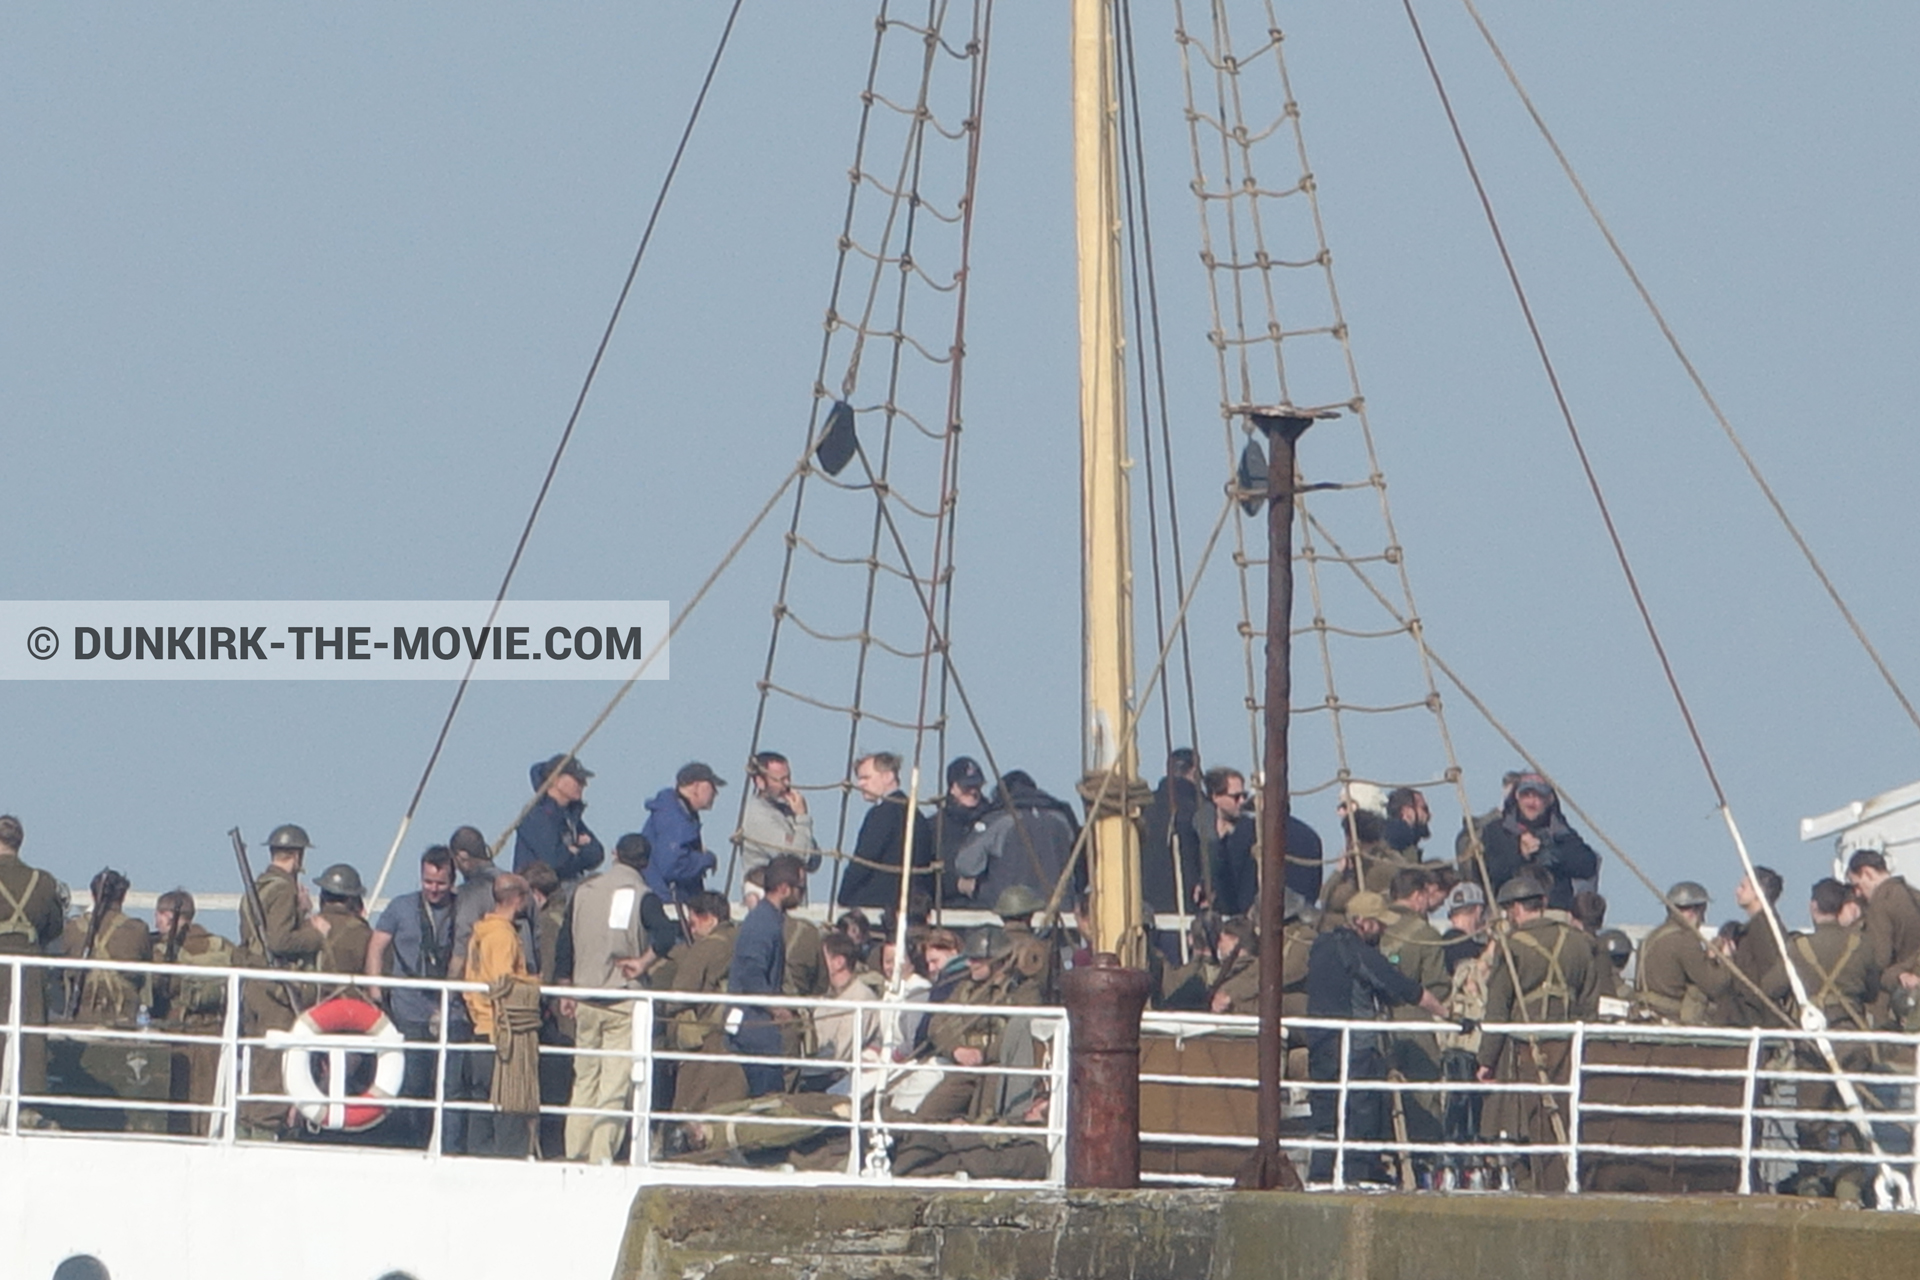 Picture with supernumeraries, Hoyte van Hoytema, EST pier, Christopher Nolan, technical team, M/S Rogaland,  from behind the scene of the Dunkirk movie by Nolan